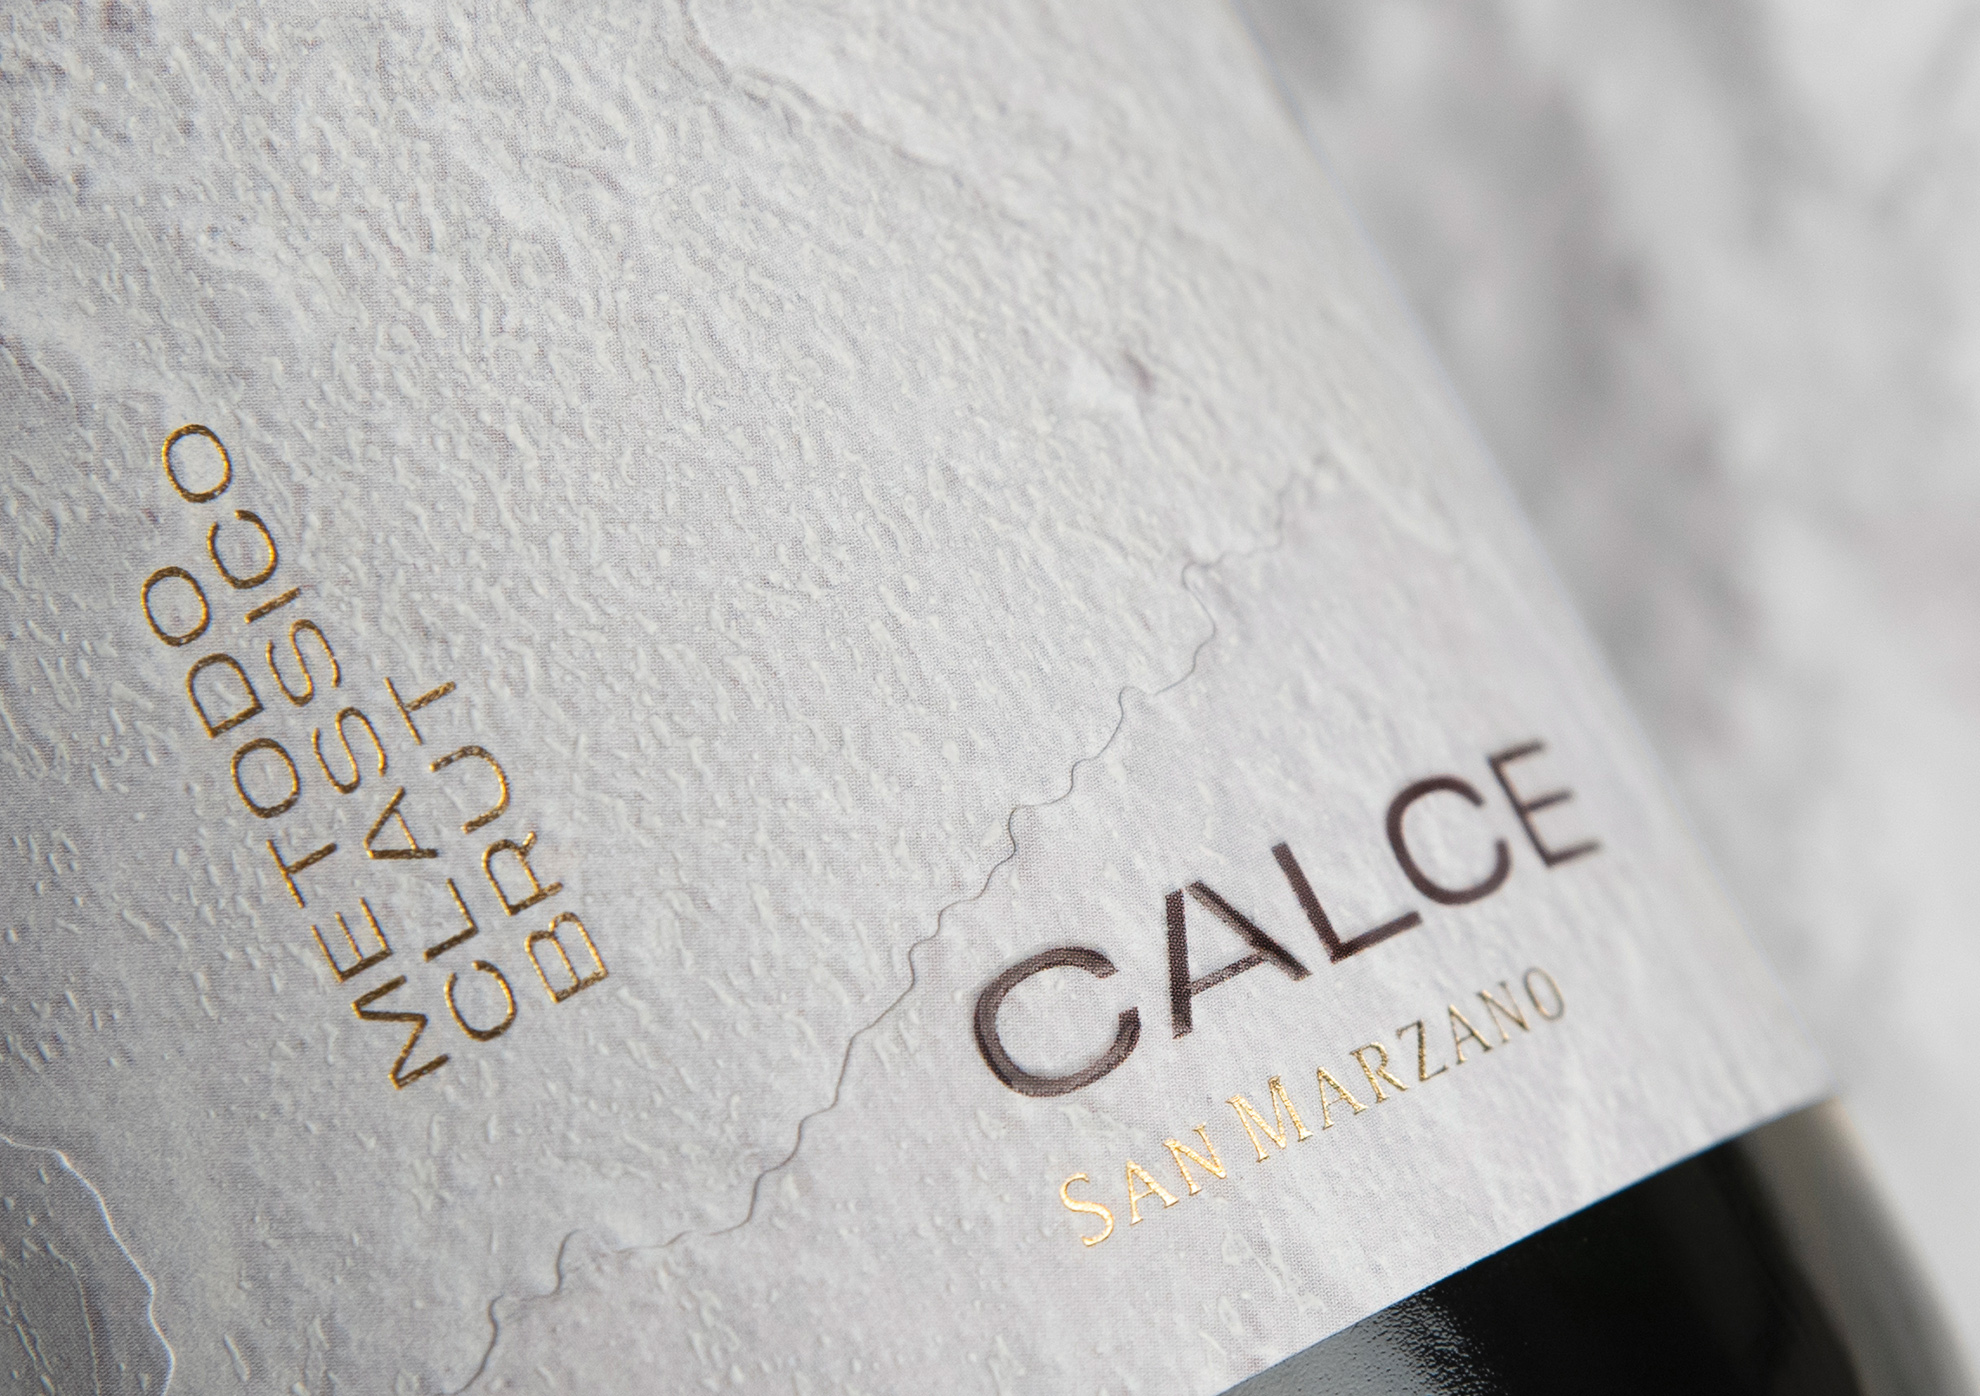 Calce Metodo Classico Brut Label Packaging Design by Usopposto